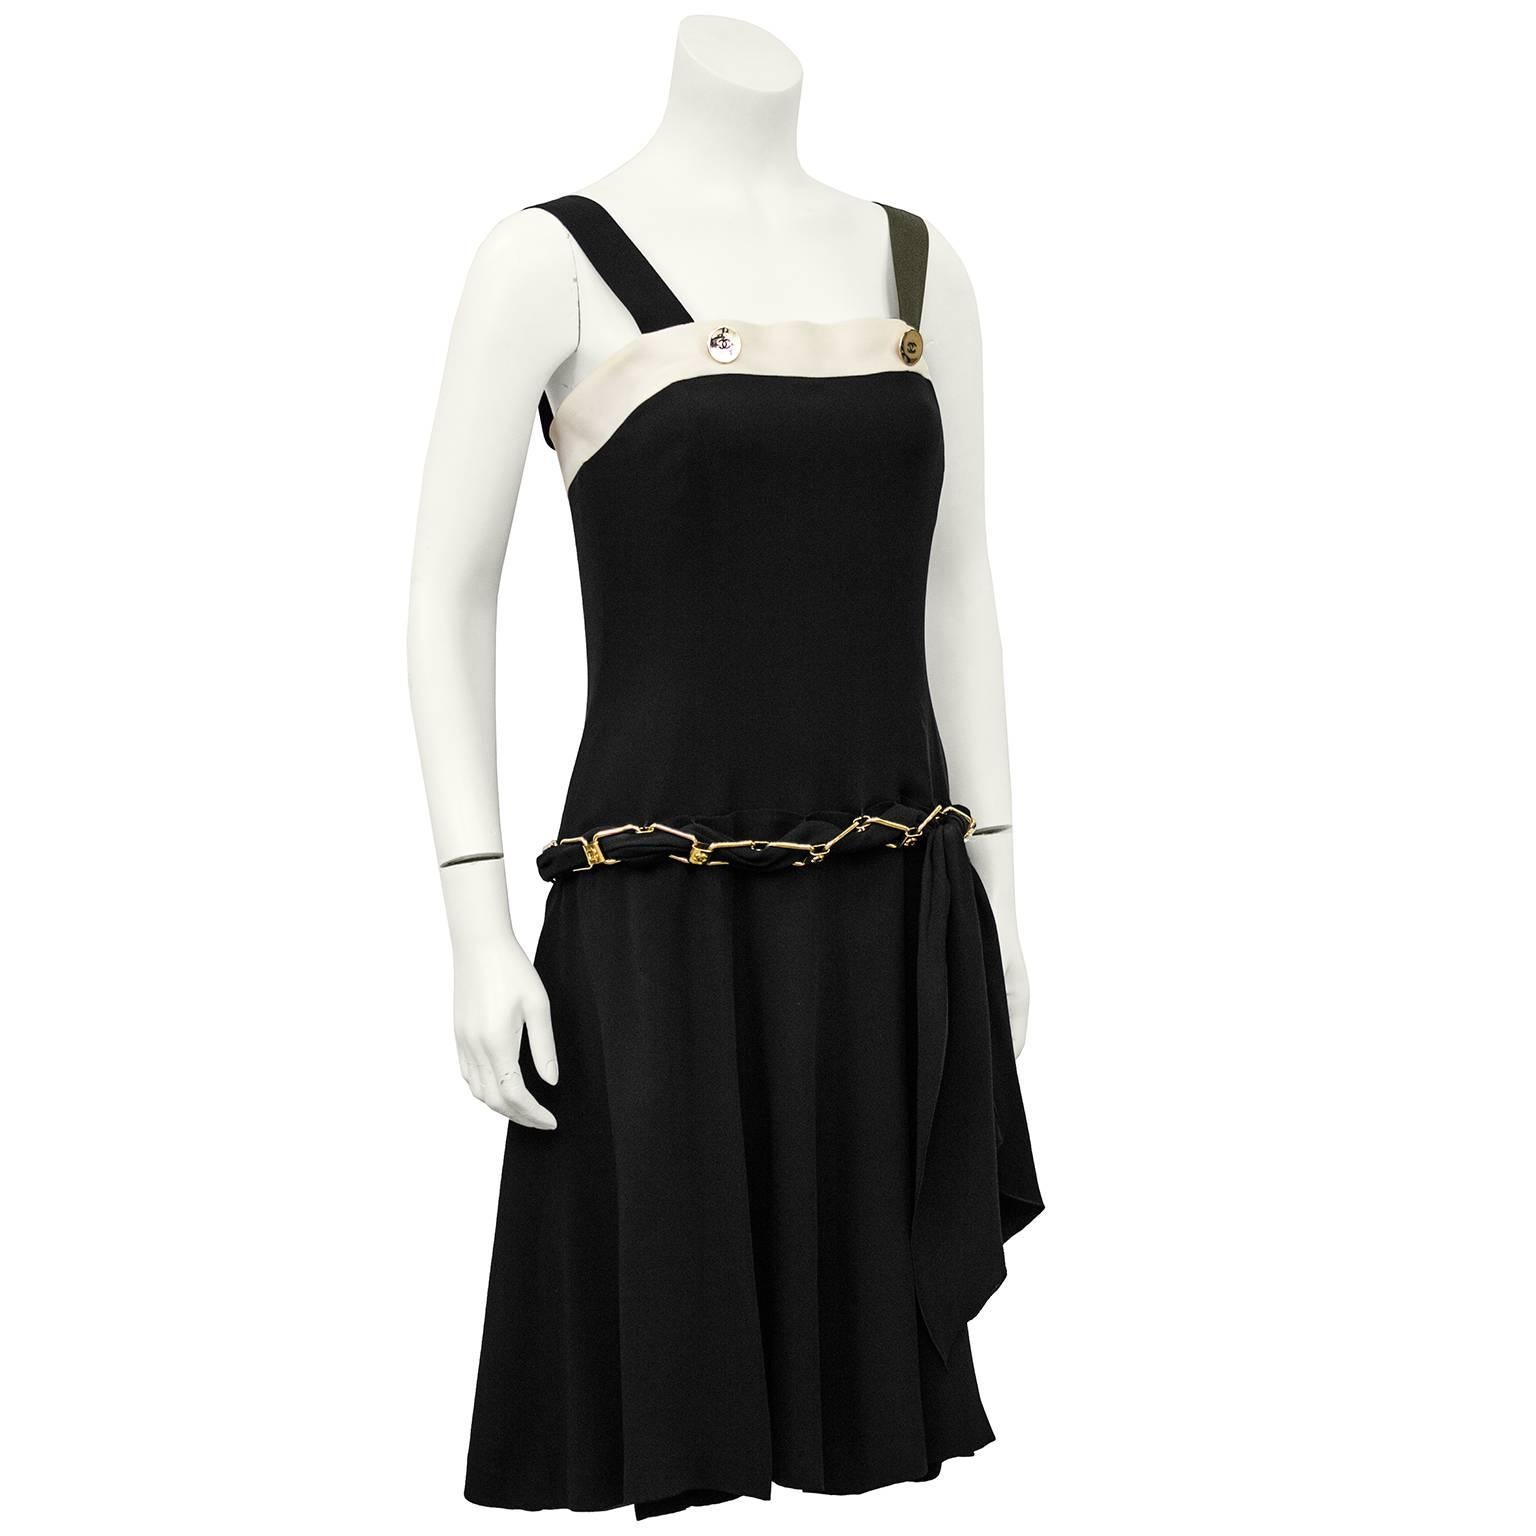 1980's Chanel black and cream silk cocktail dress. Many interesting Chanel features on this beautiful dress. Button details at straps with cream silk banding at bust. Boning throughout bodice. Attached gold tone chain drop waist belt with